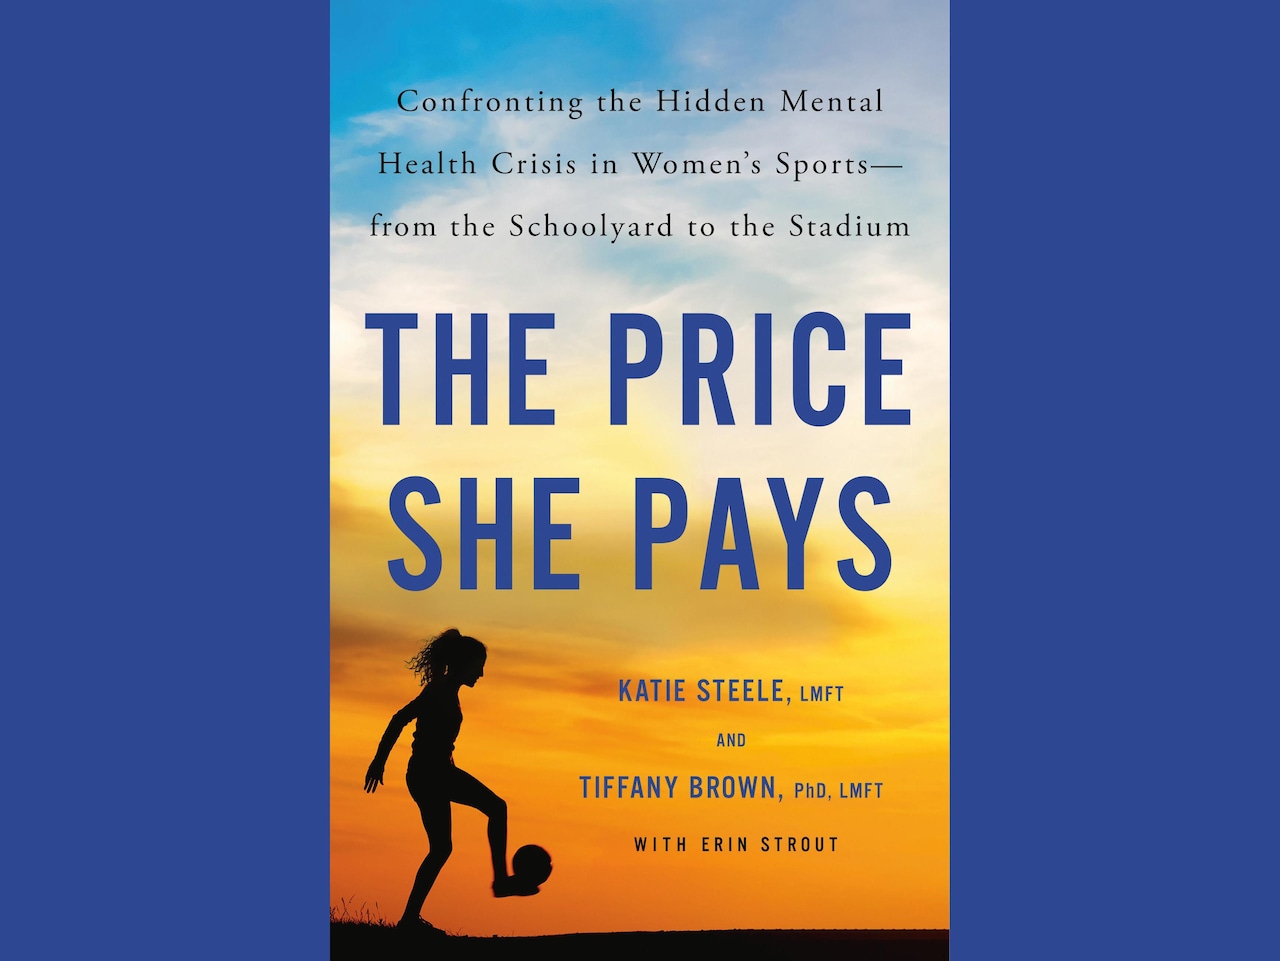 Review: The Price She Pays offers solutions to mental health crisis in womens sports [Video]